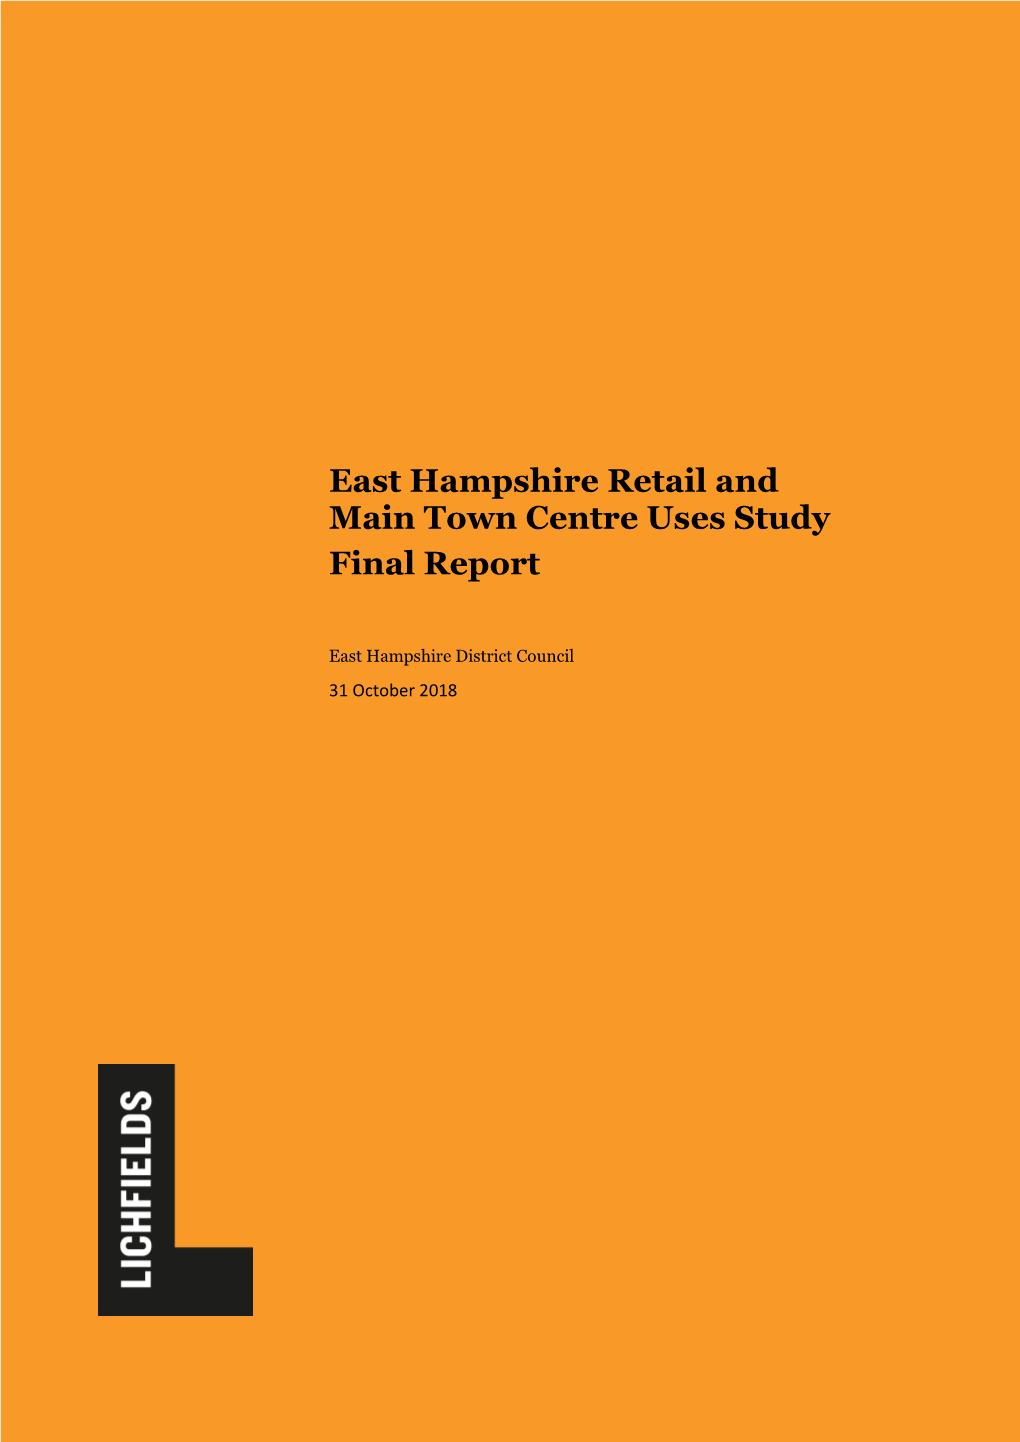 East Hampshire Retail and Main Town Centre Uses Study Final Report